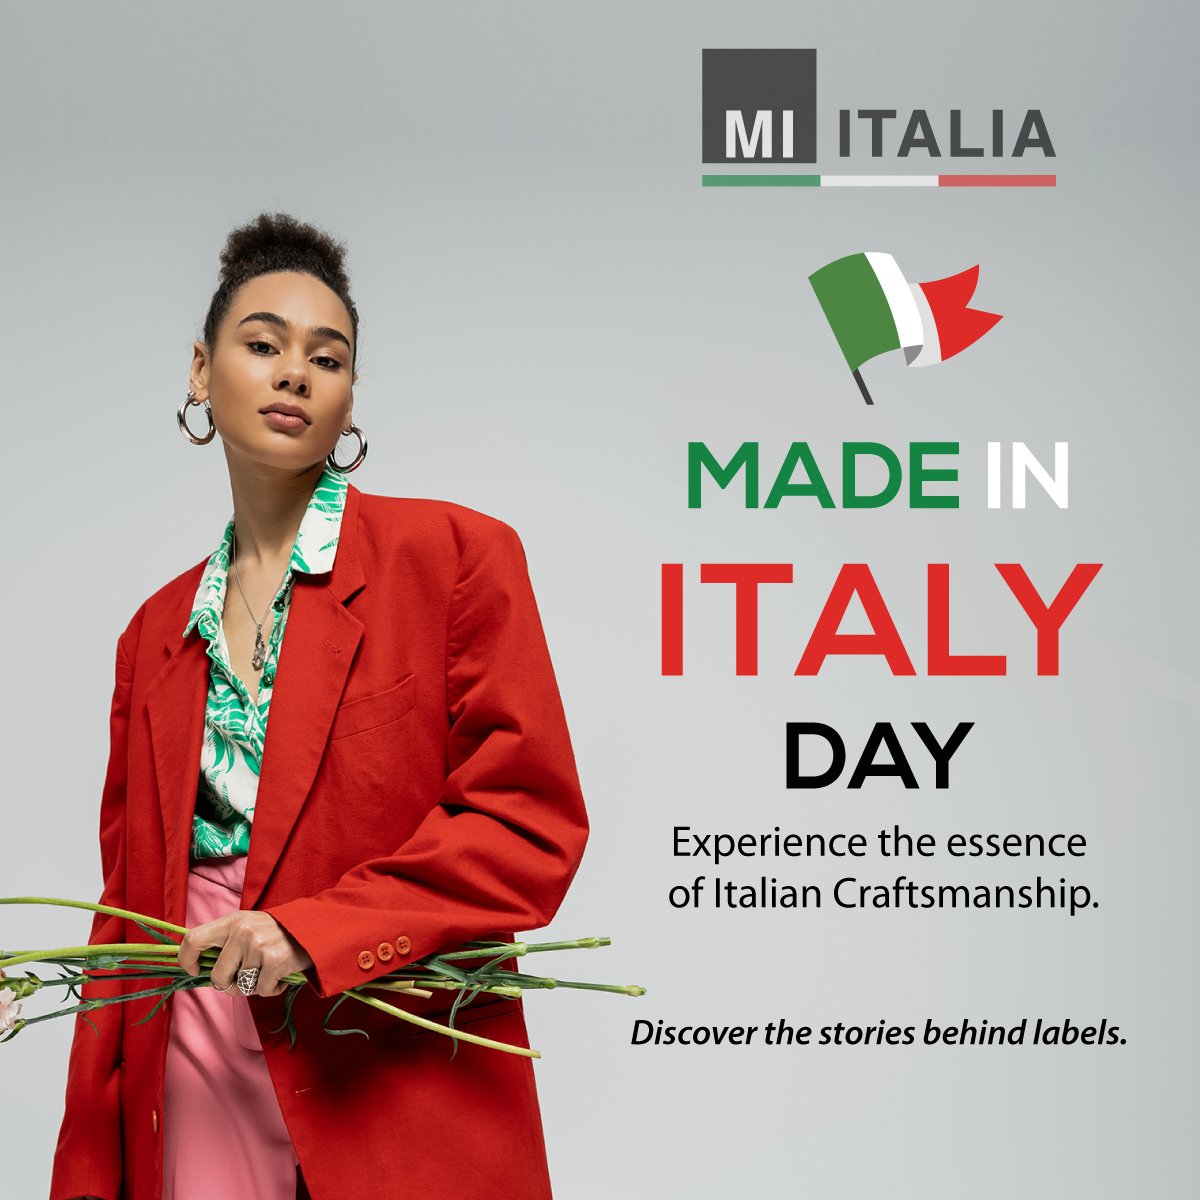 Happy National Made in Italy Day! 🇮🇹 Celebrating the rich heritage of Italian craftsmanship and style. Let's support and cherish the creativity and quality behind every Italian-made product. 
Buona giornata del 'Made in Italy'! 
.
.
.
#MadeInItalyDay #ItalianCraftsmanship